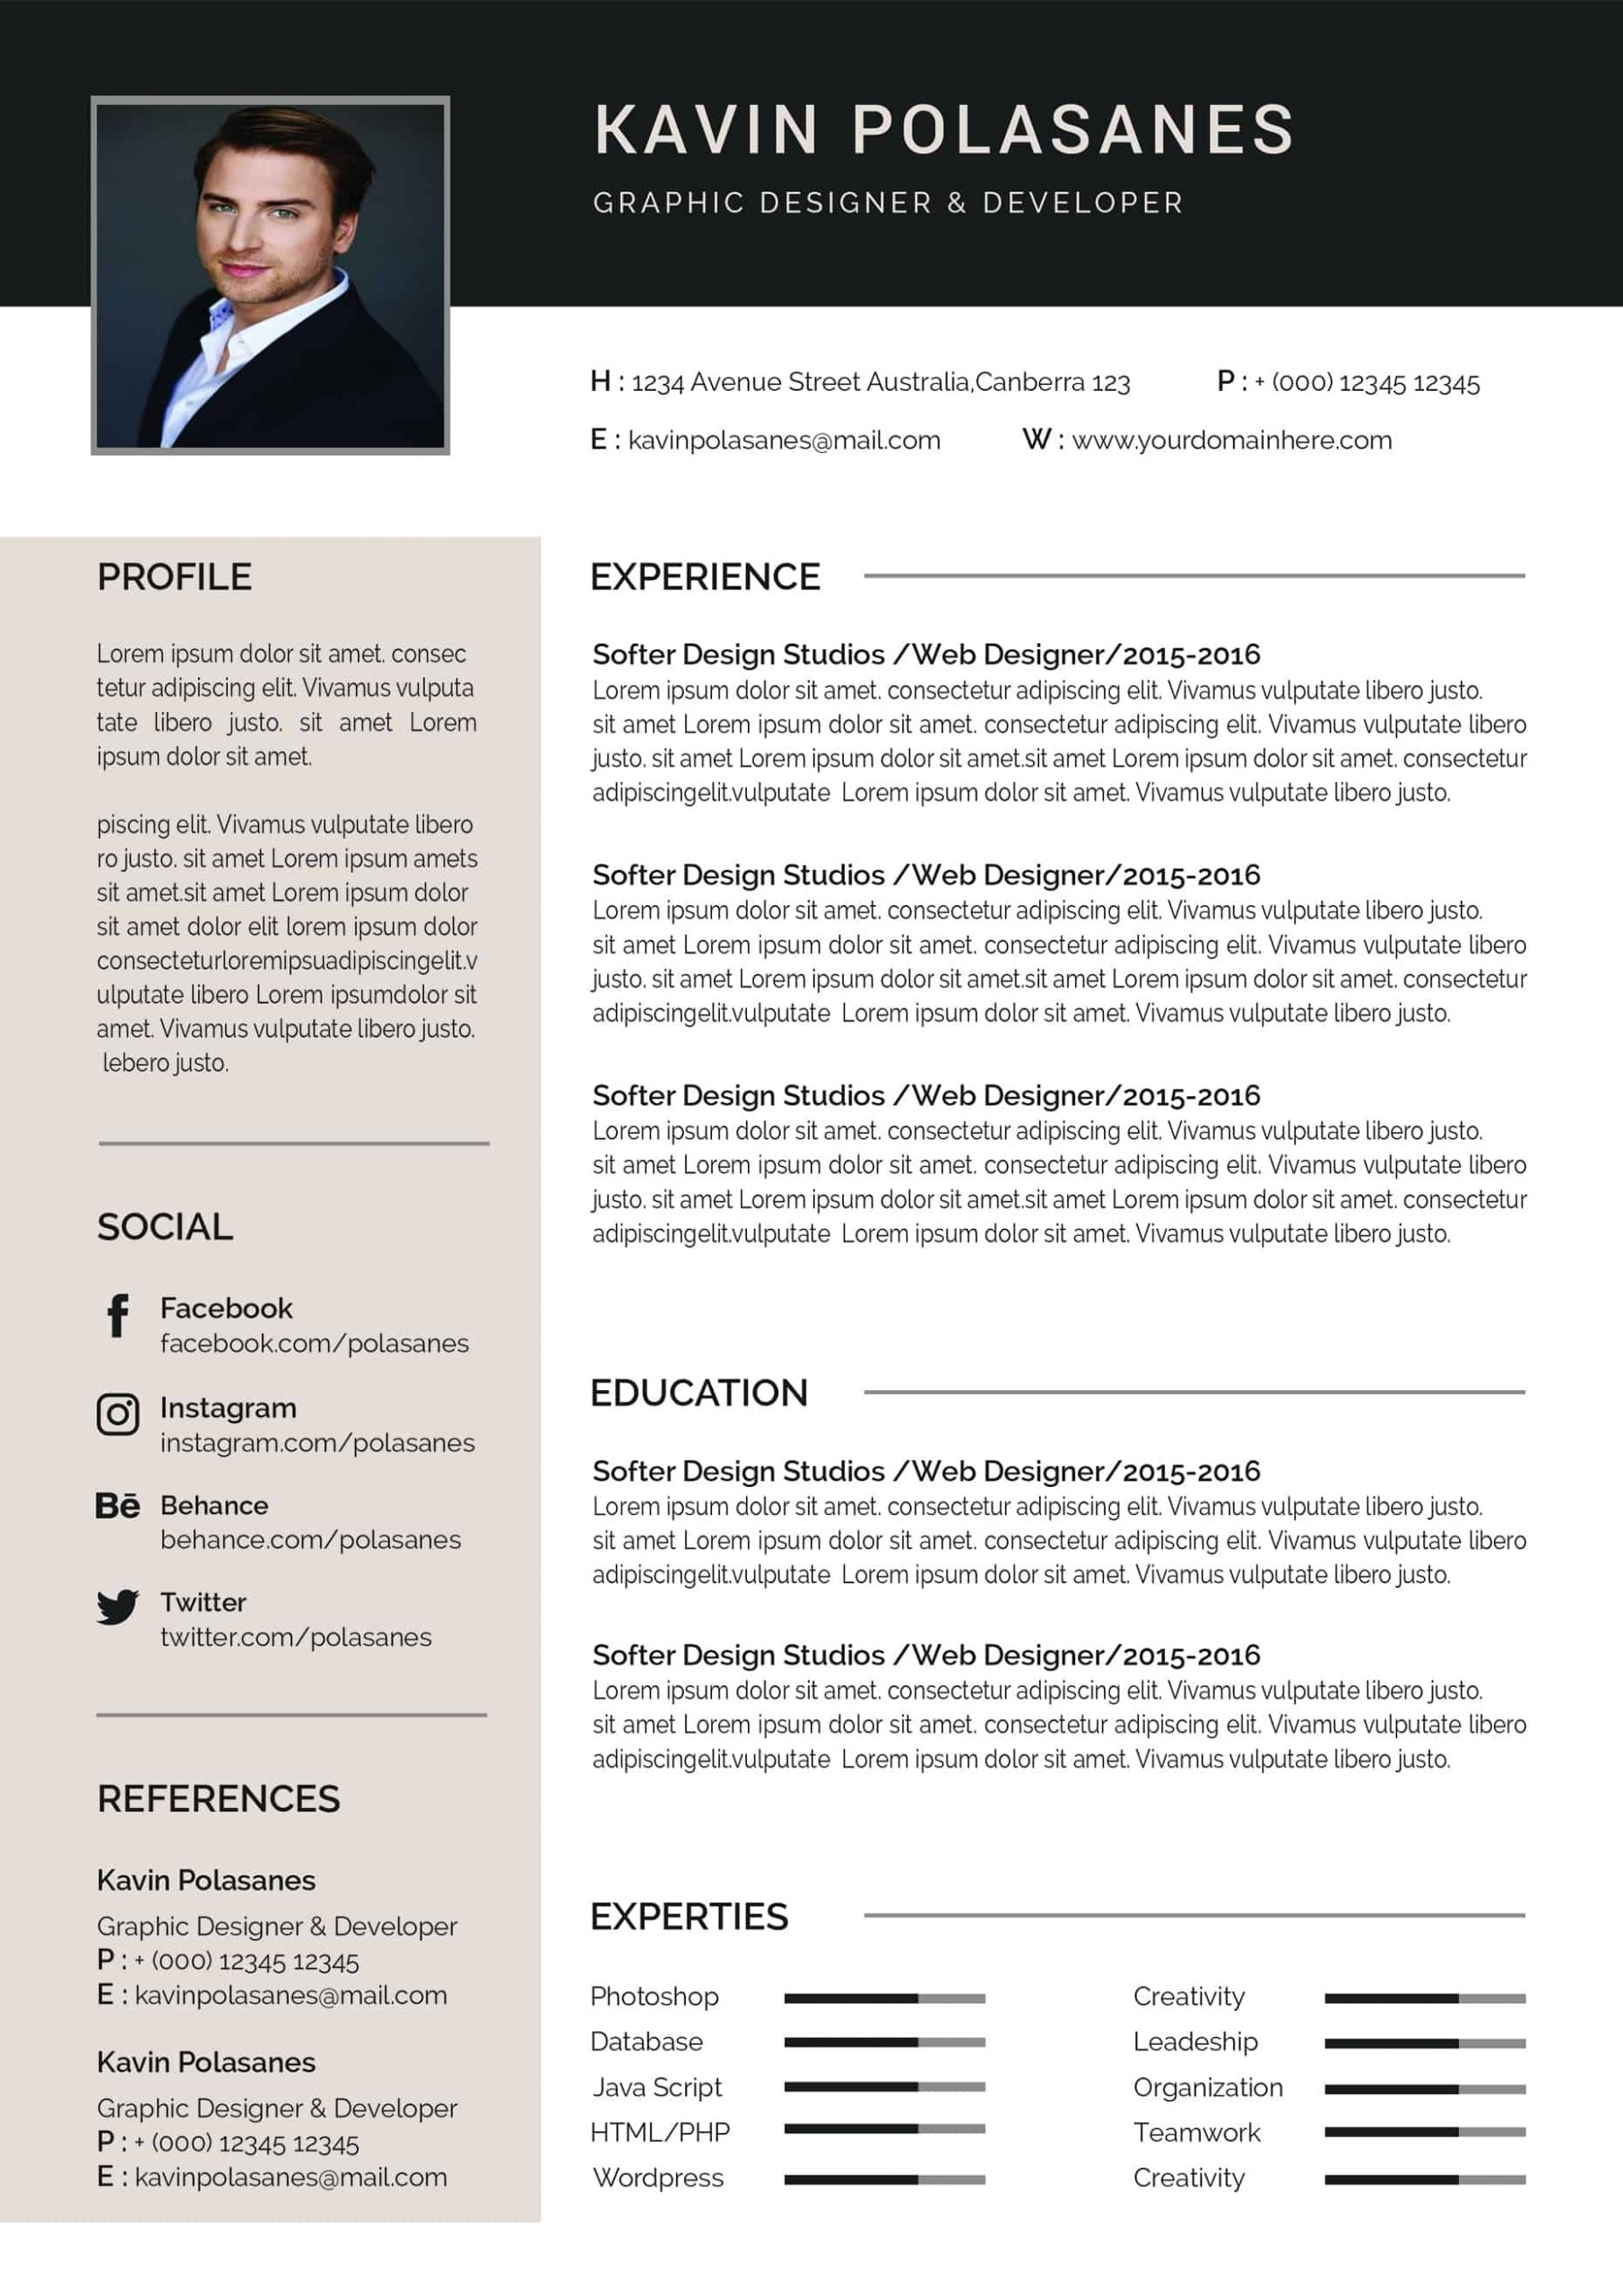 resume-with-picture-template-luxury-free-professional-resume-and-cv